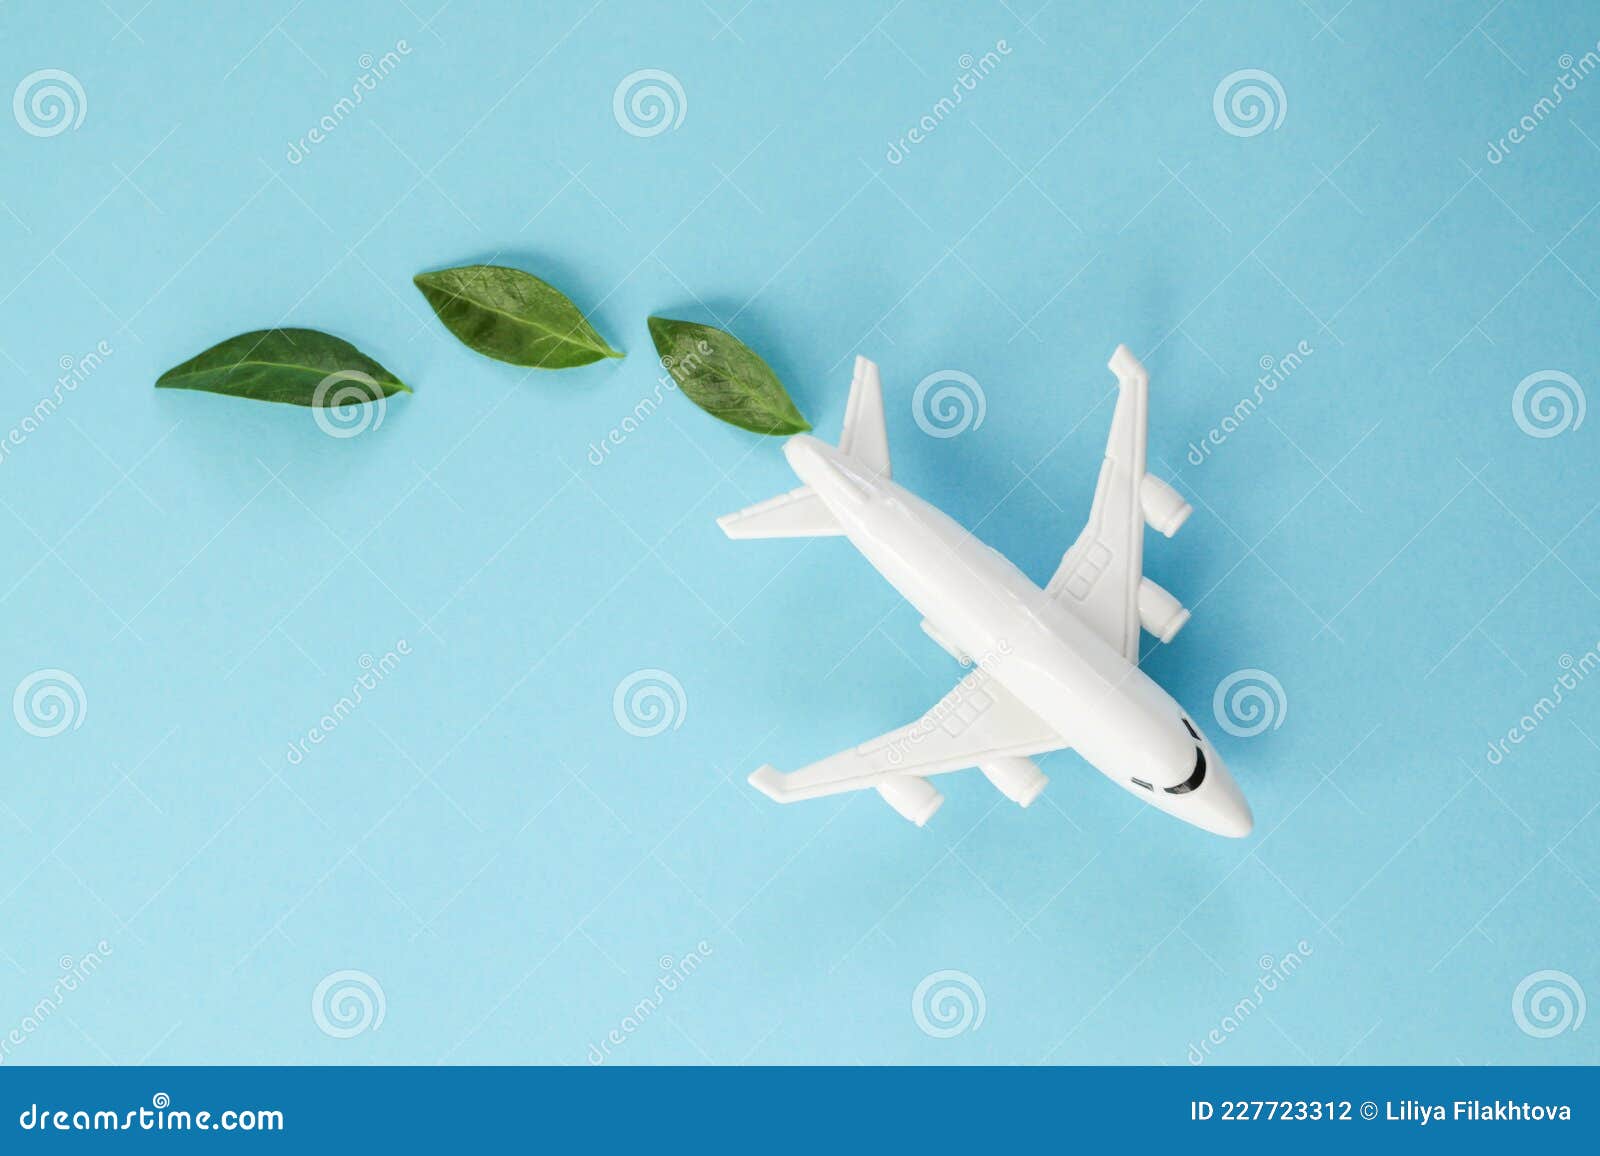 sustainable aviation fuel. white airplane model, fresh green leaves on blue background. green biofuel for aviation